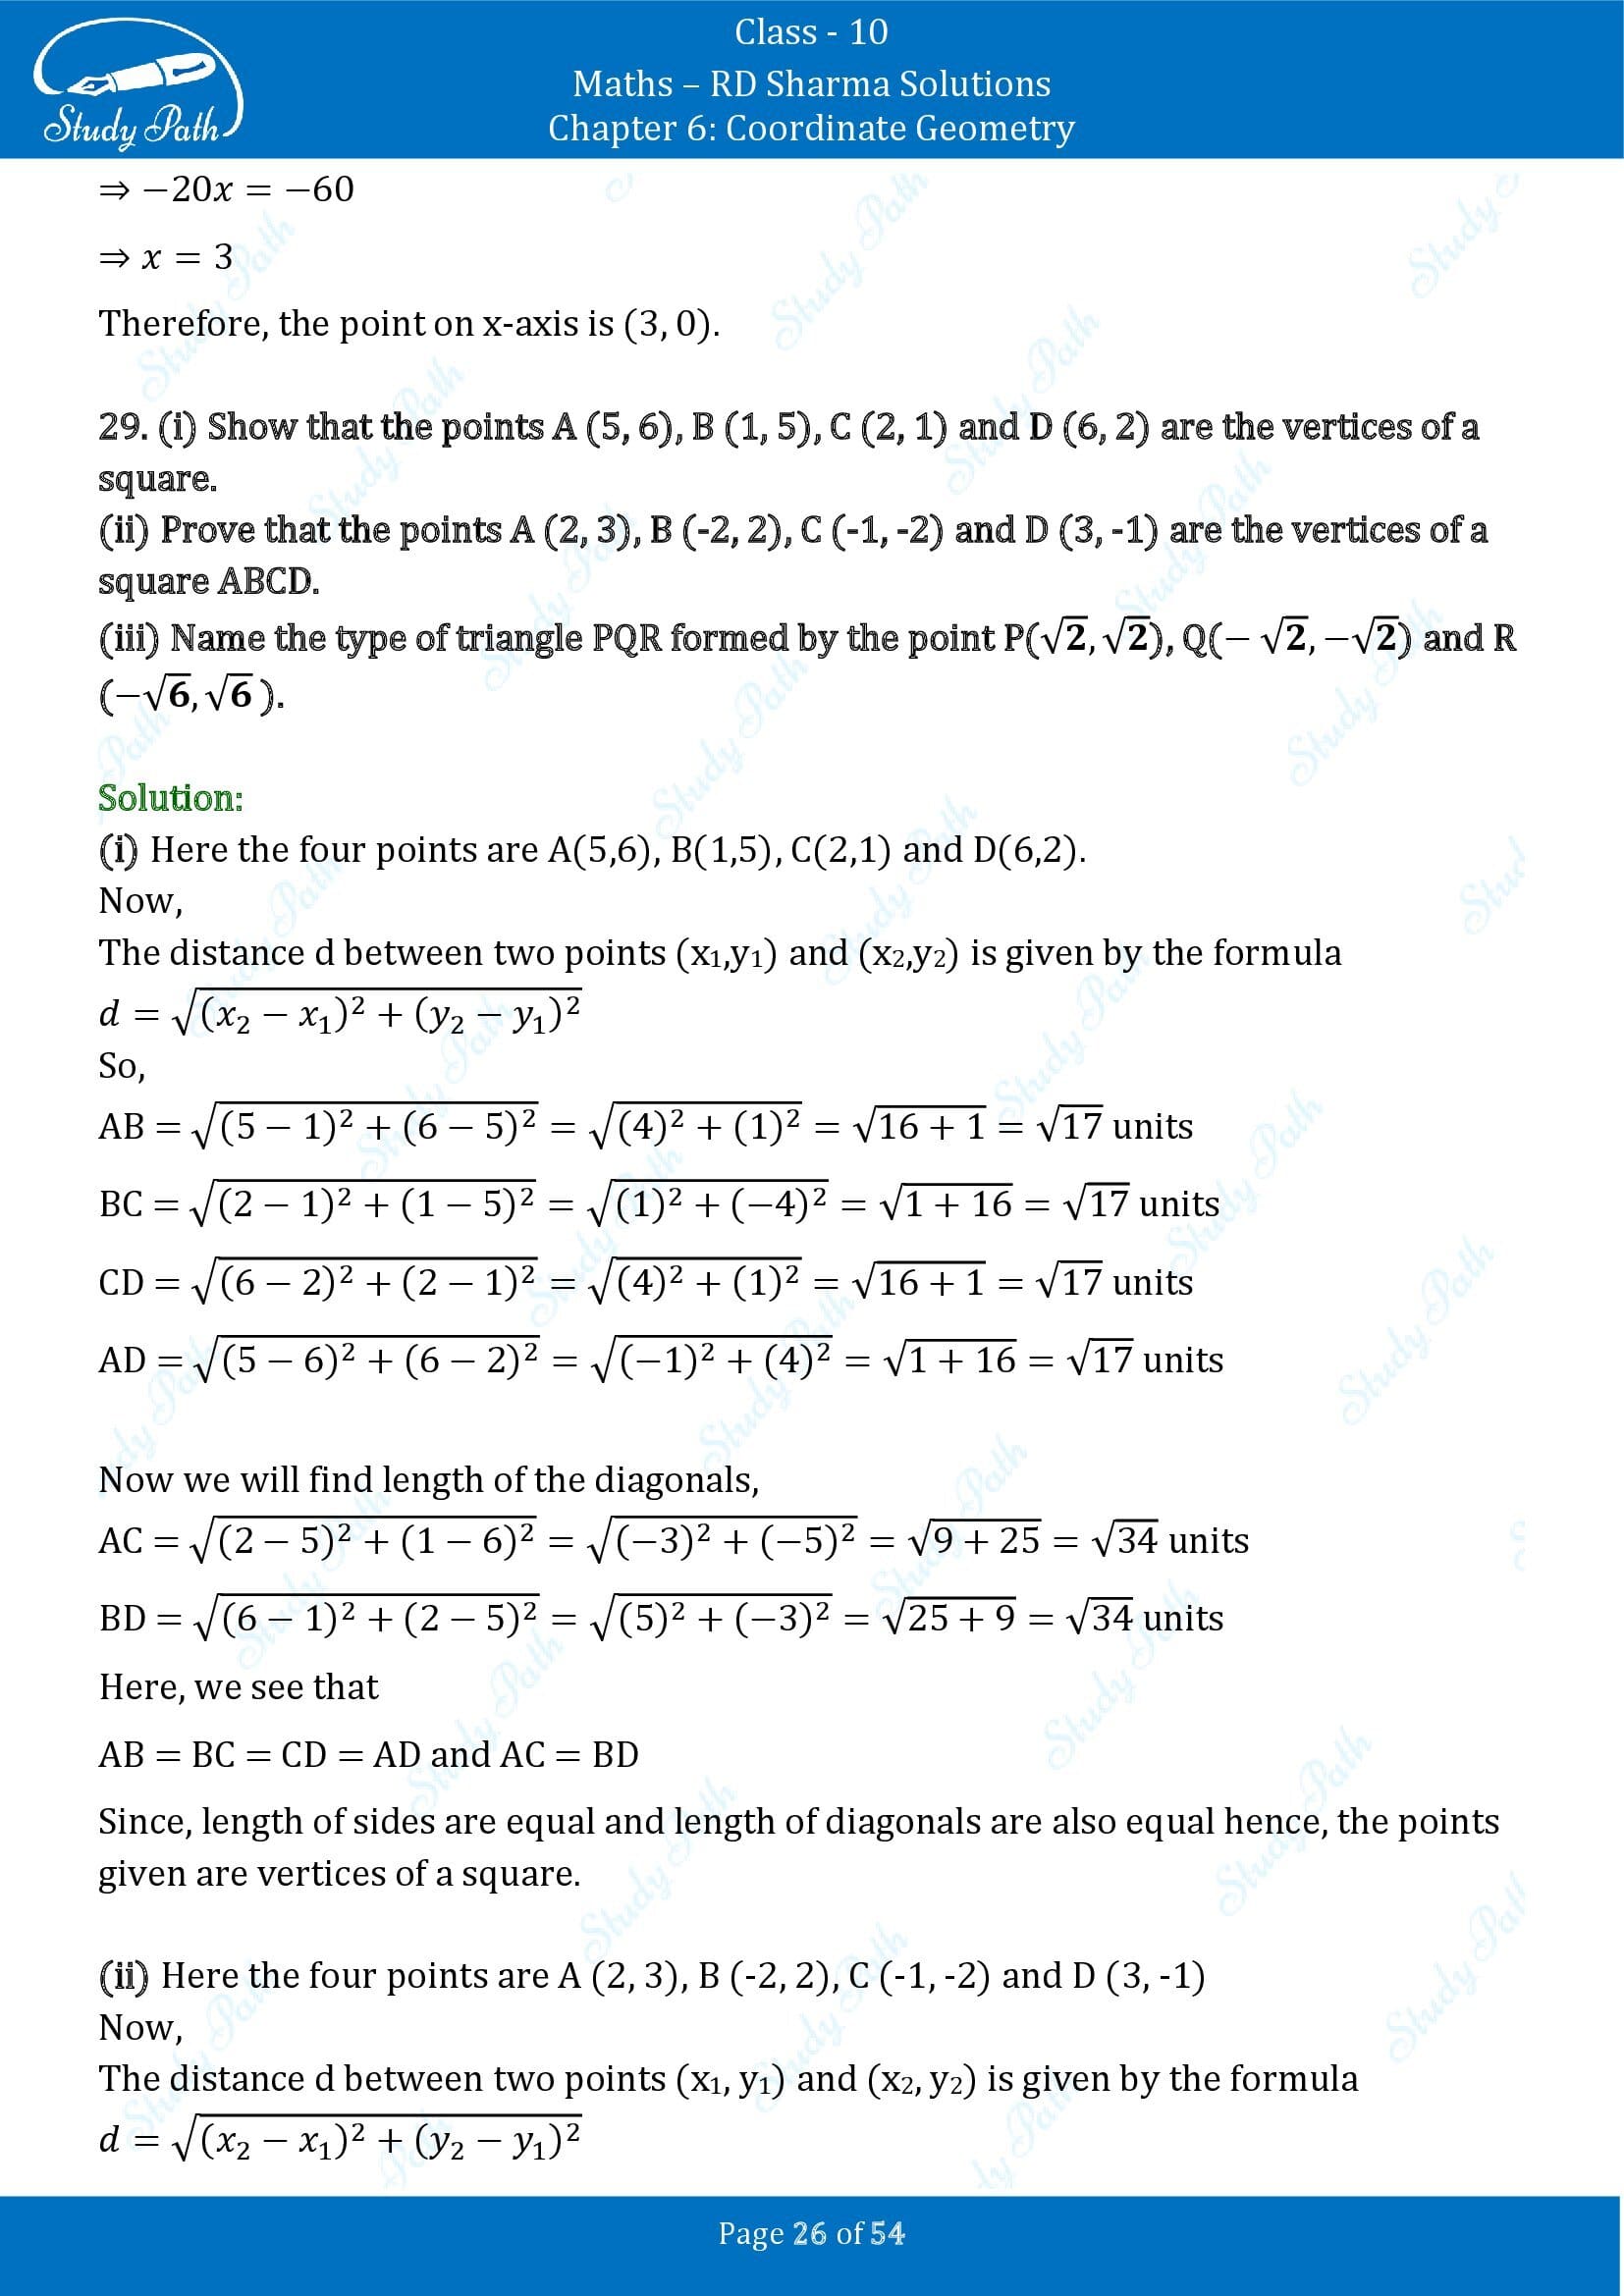 RD Sharma Solutions Class 10 Chapter 6 Coordinate Geometry Exercise 6.2 0026